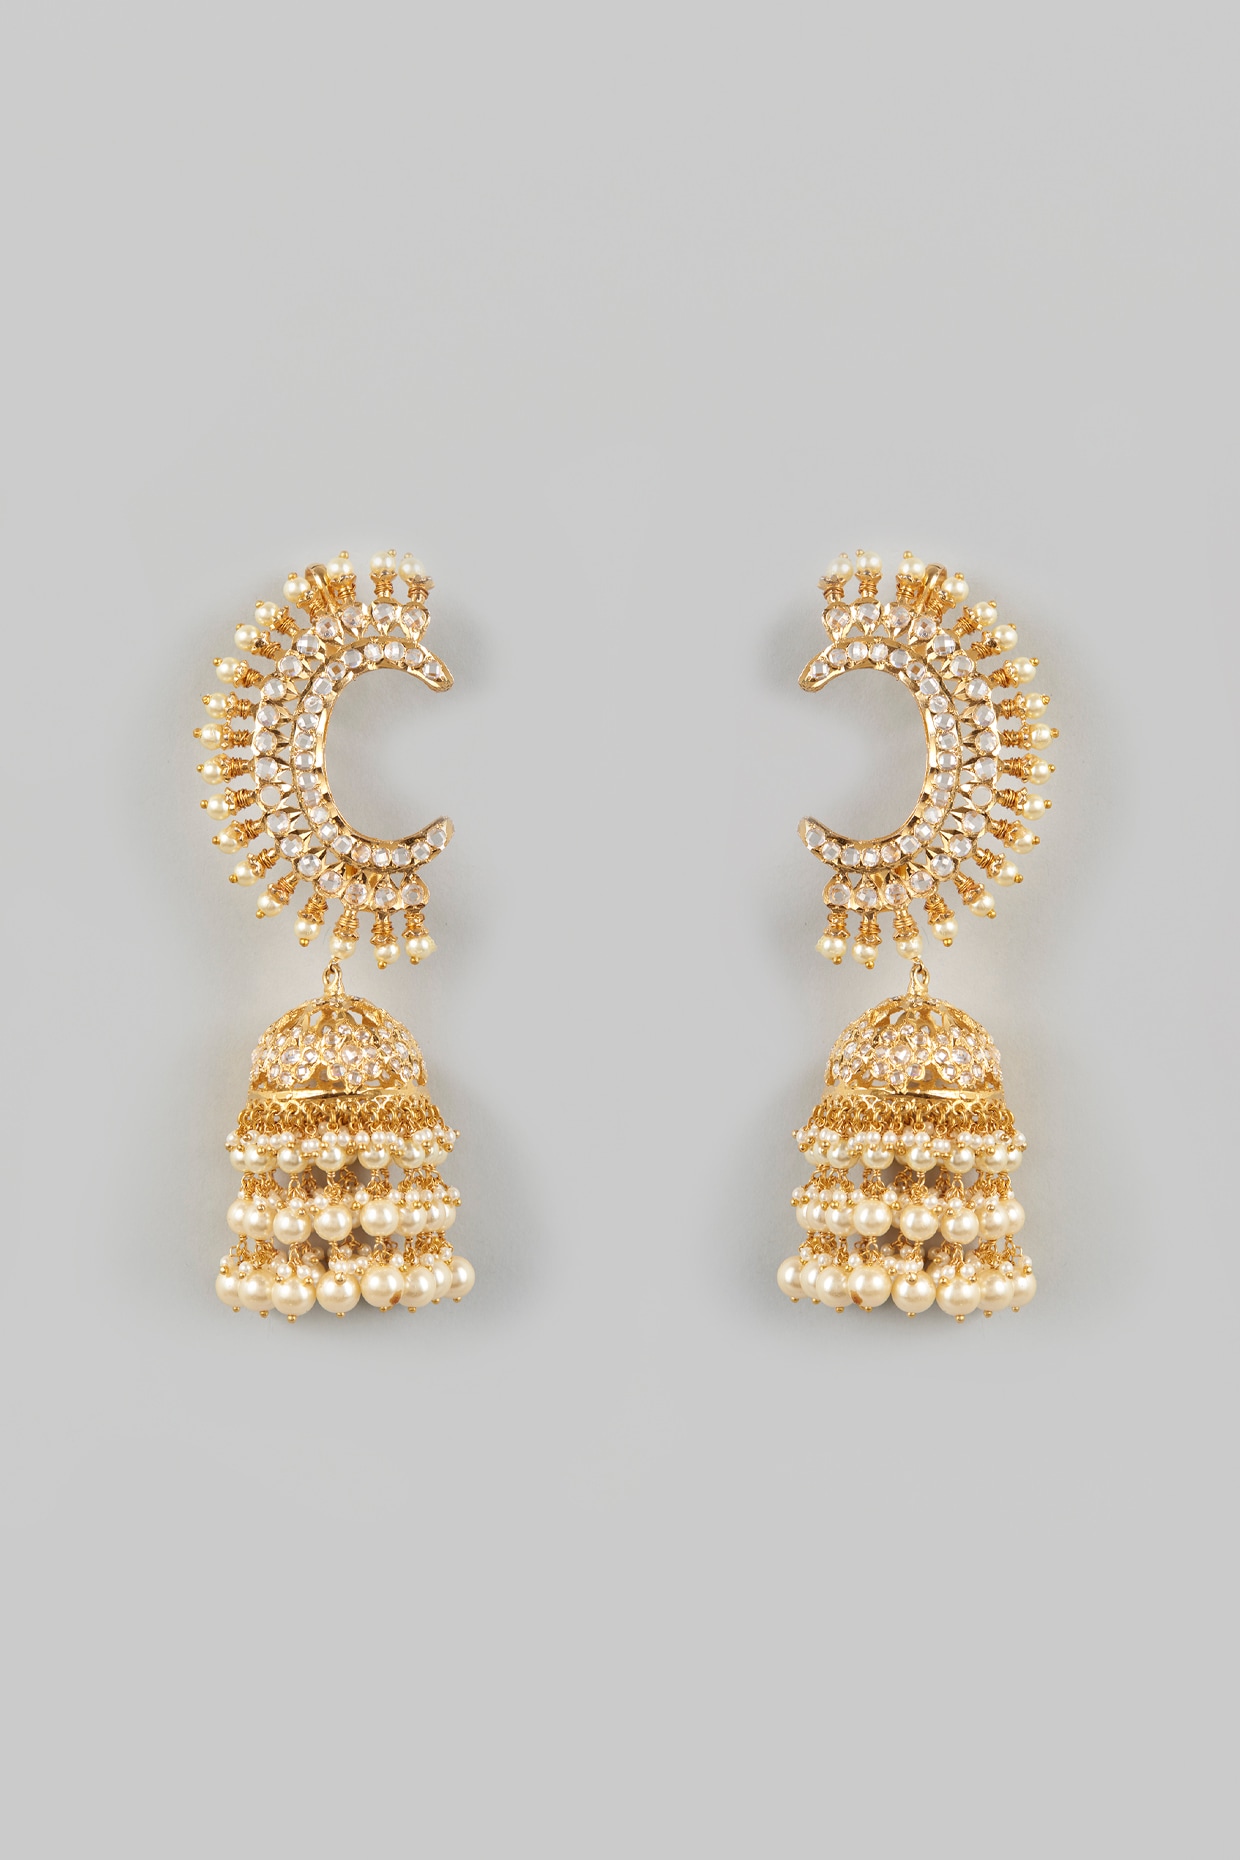 The Curated Ear Step Up Your Earring Game  J Landa Jewelry Blog